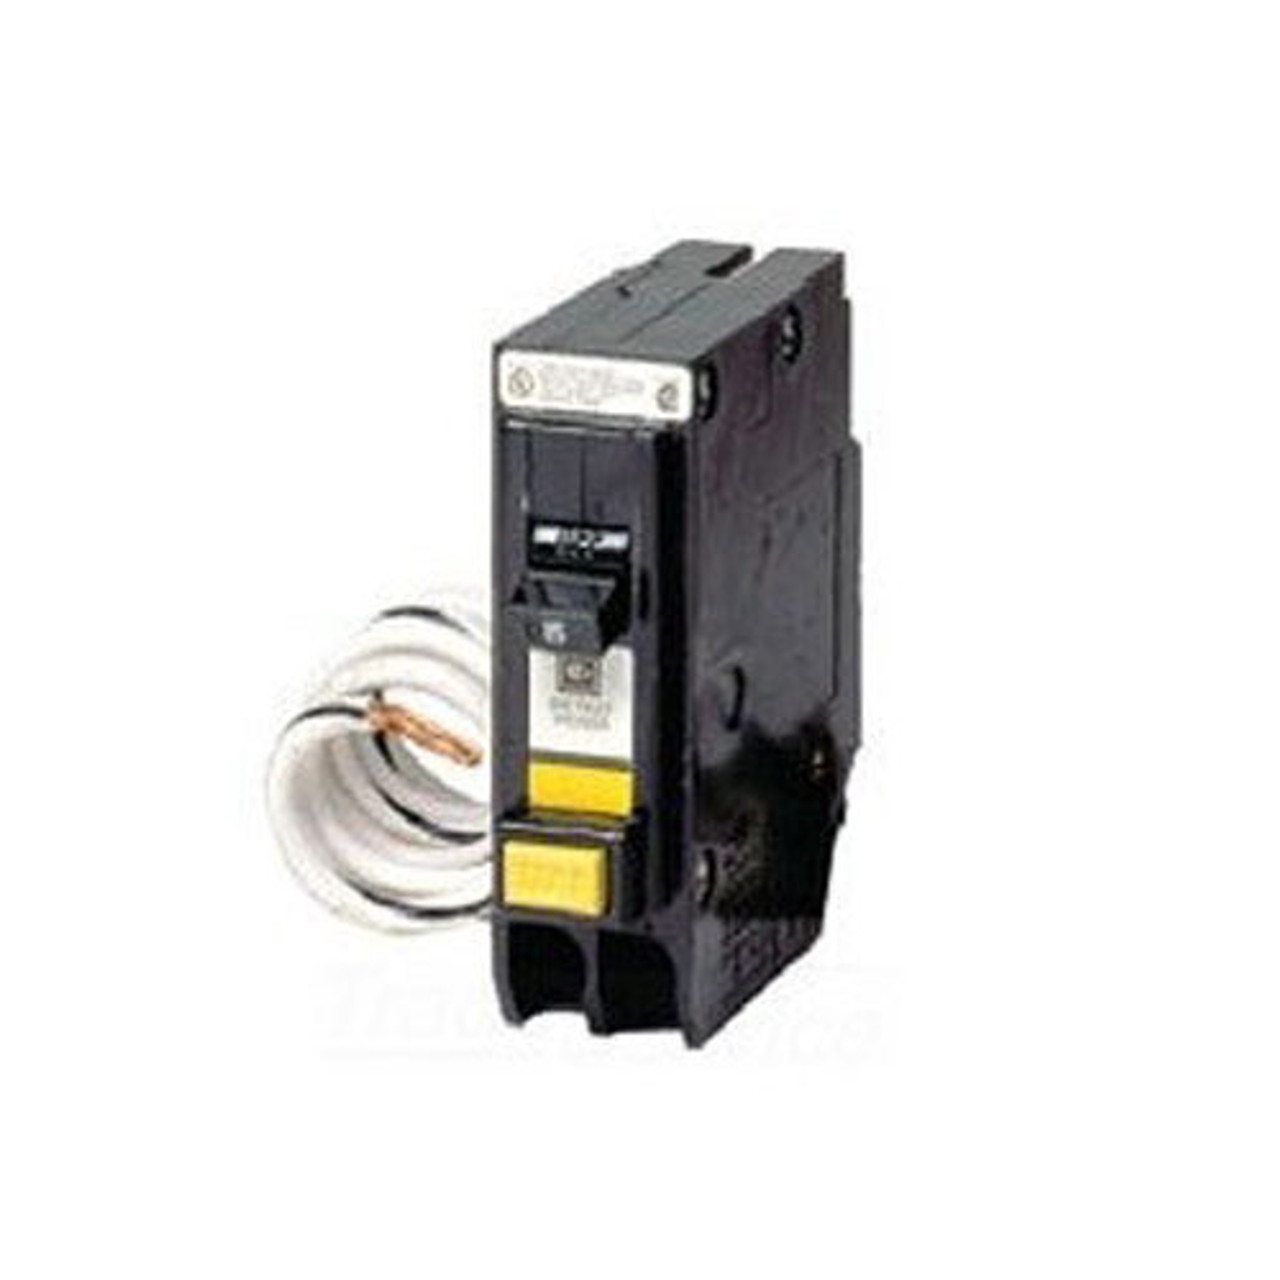 Cutler Hammer BRCAF120 1 Pole 20 Amp 120/240V Compact Arc Fault Circuit Breaker - New